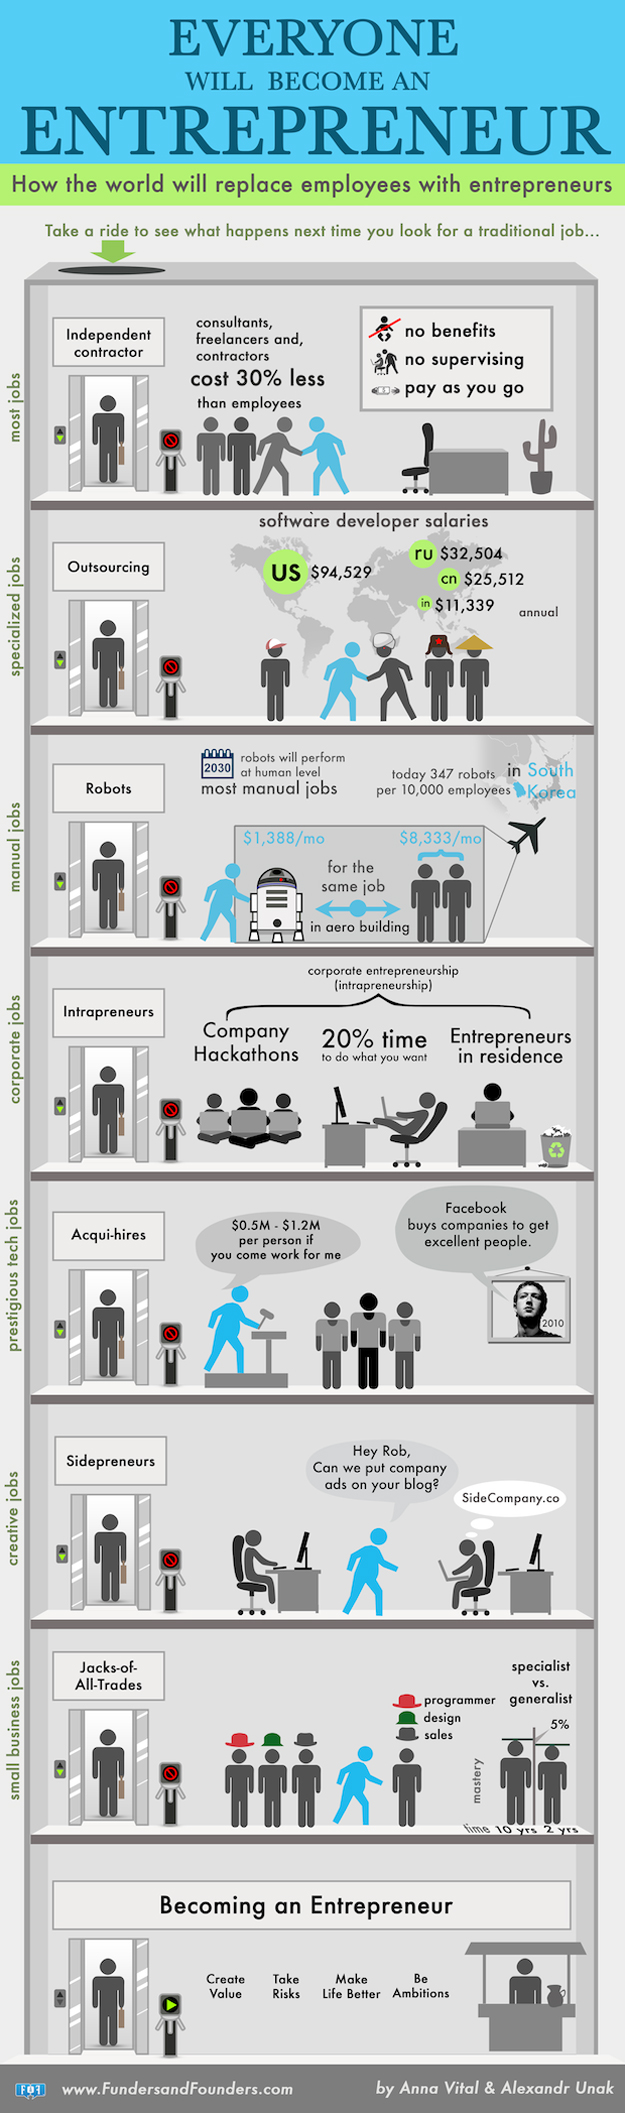 everyone-will-be-entrepreneur-infographic